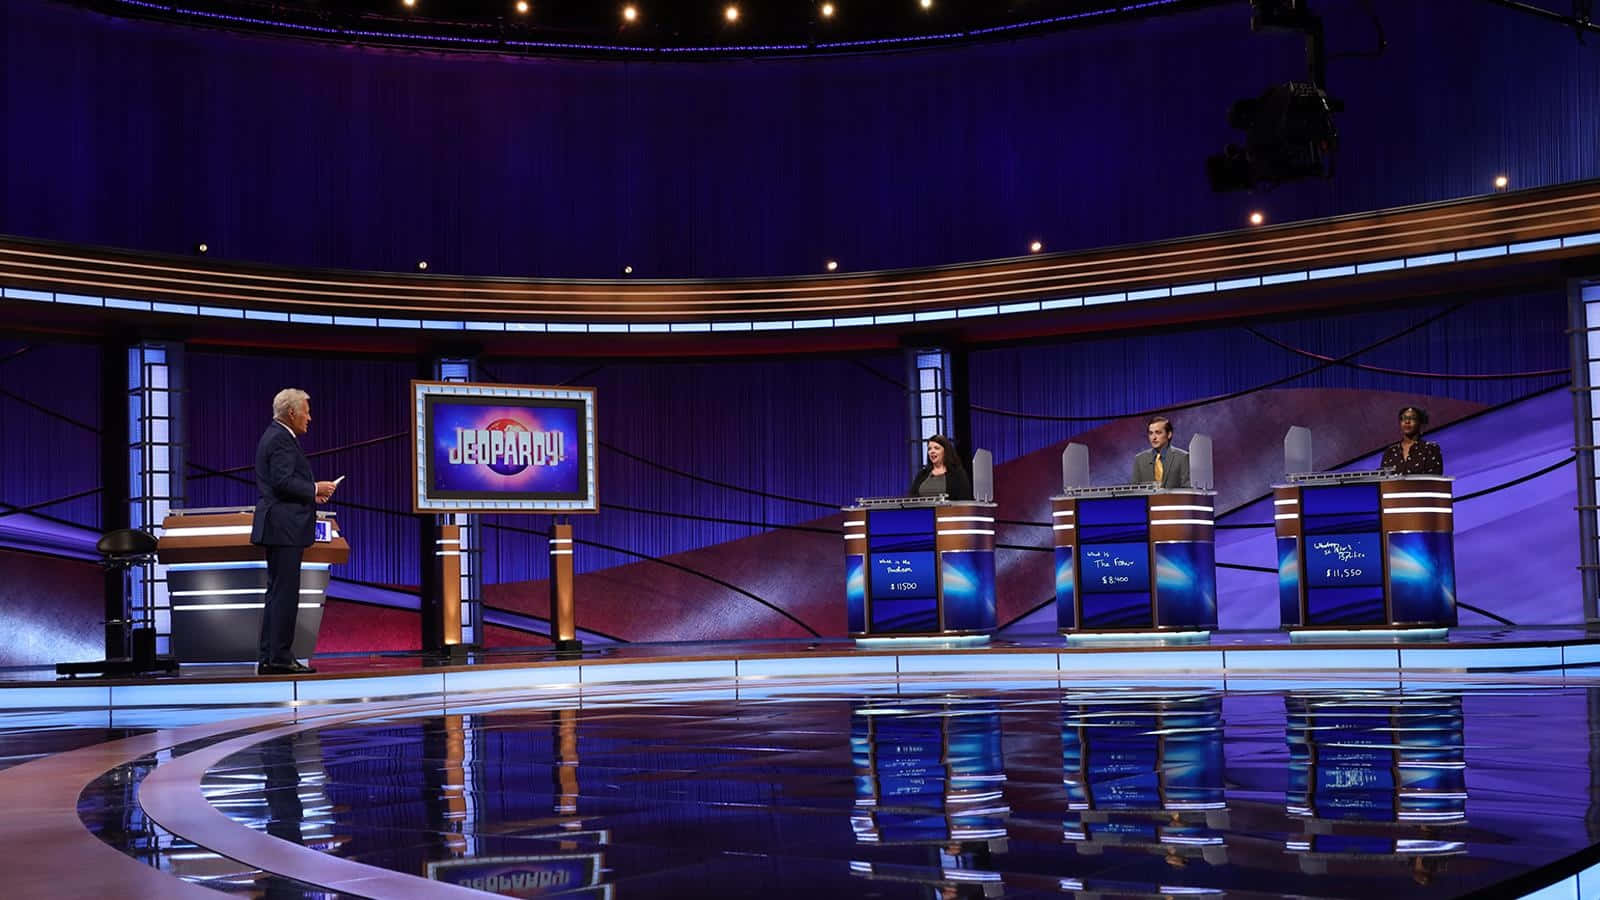 The Stage Of The Jeopardy Show With Three People On Stage